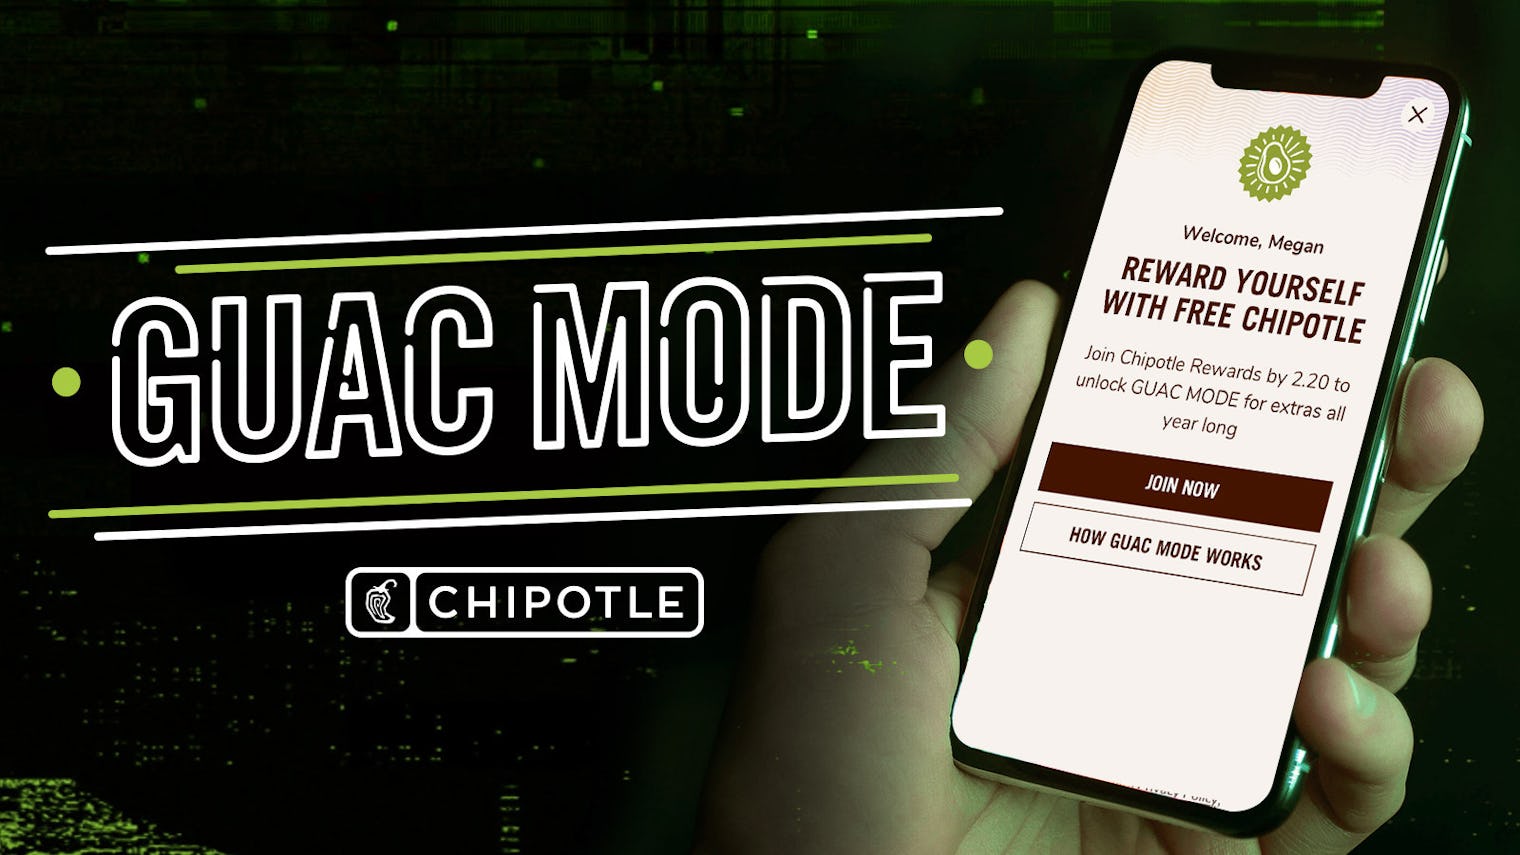 How To Get Free Guacamole At Chipotle